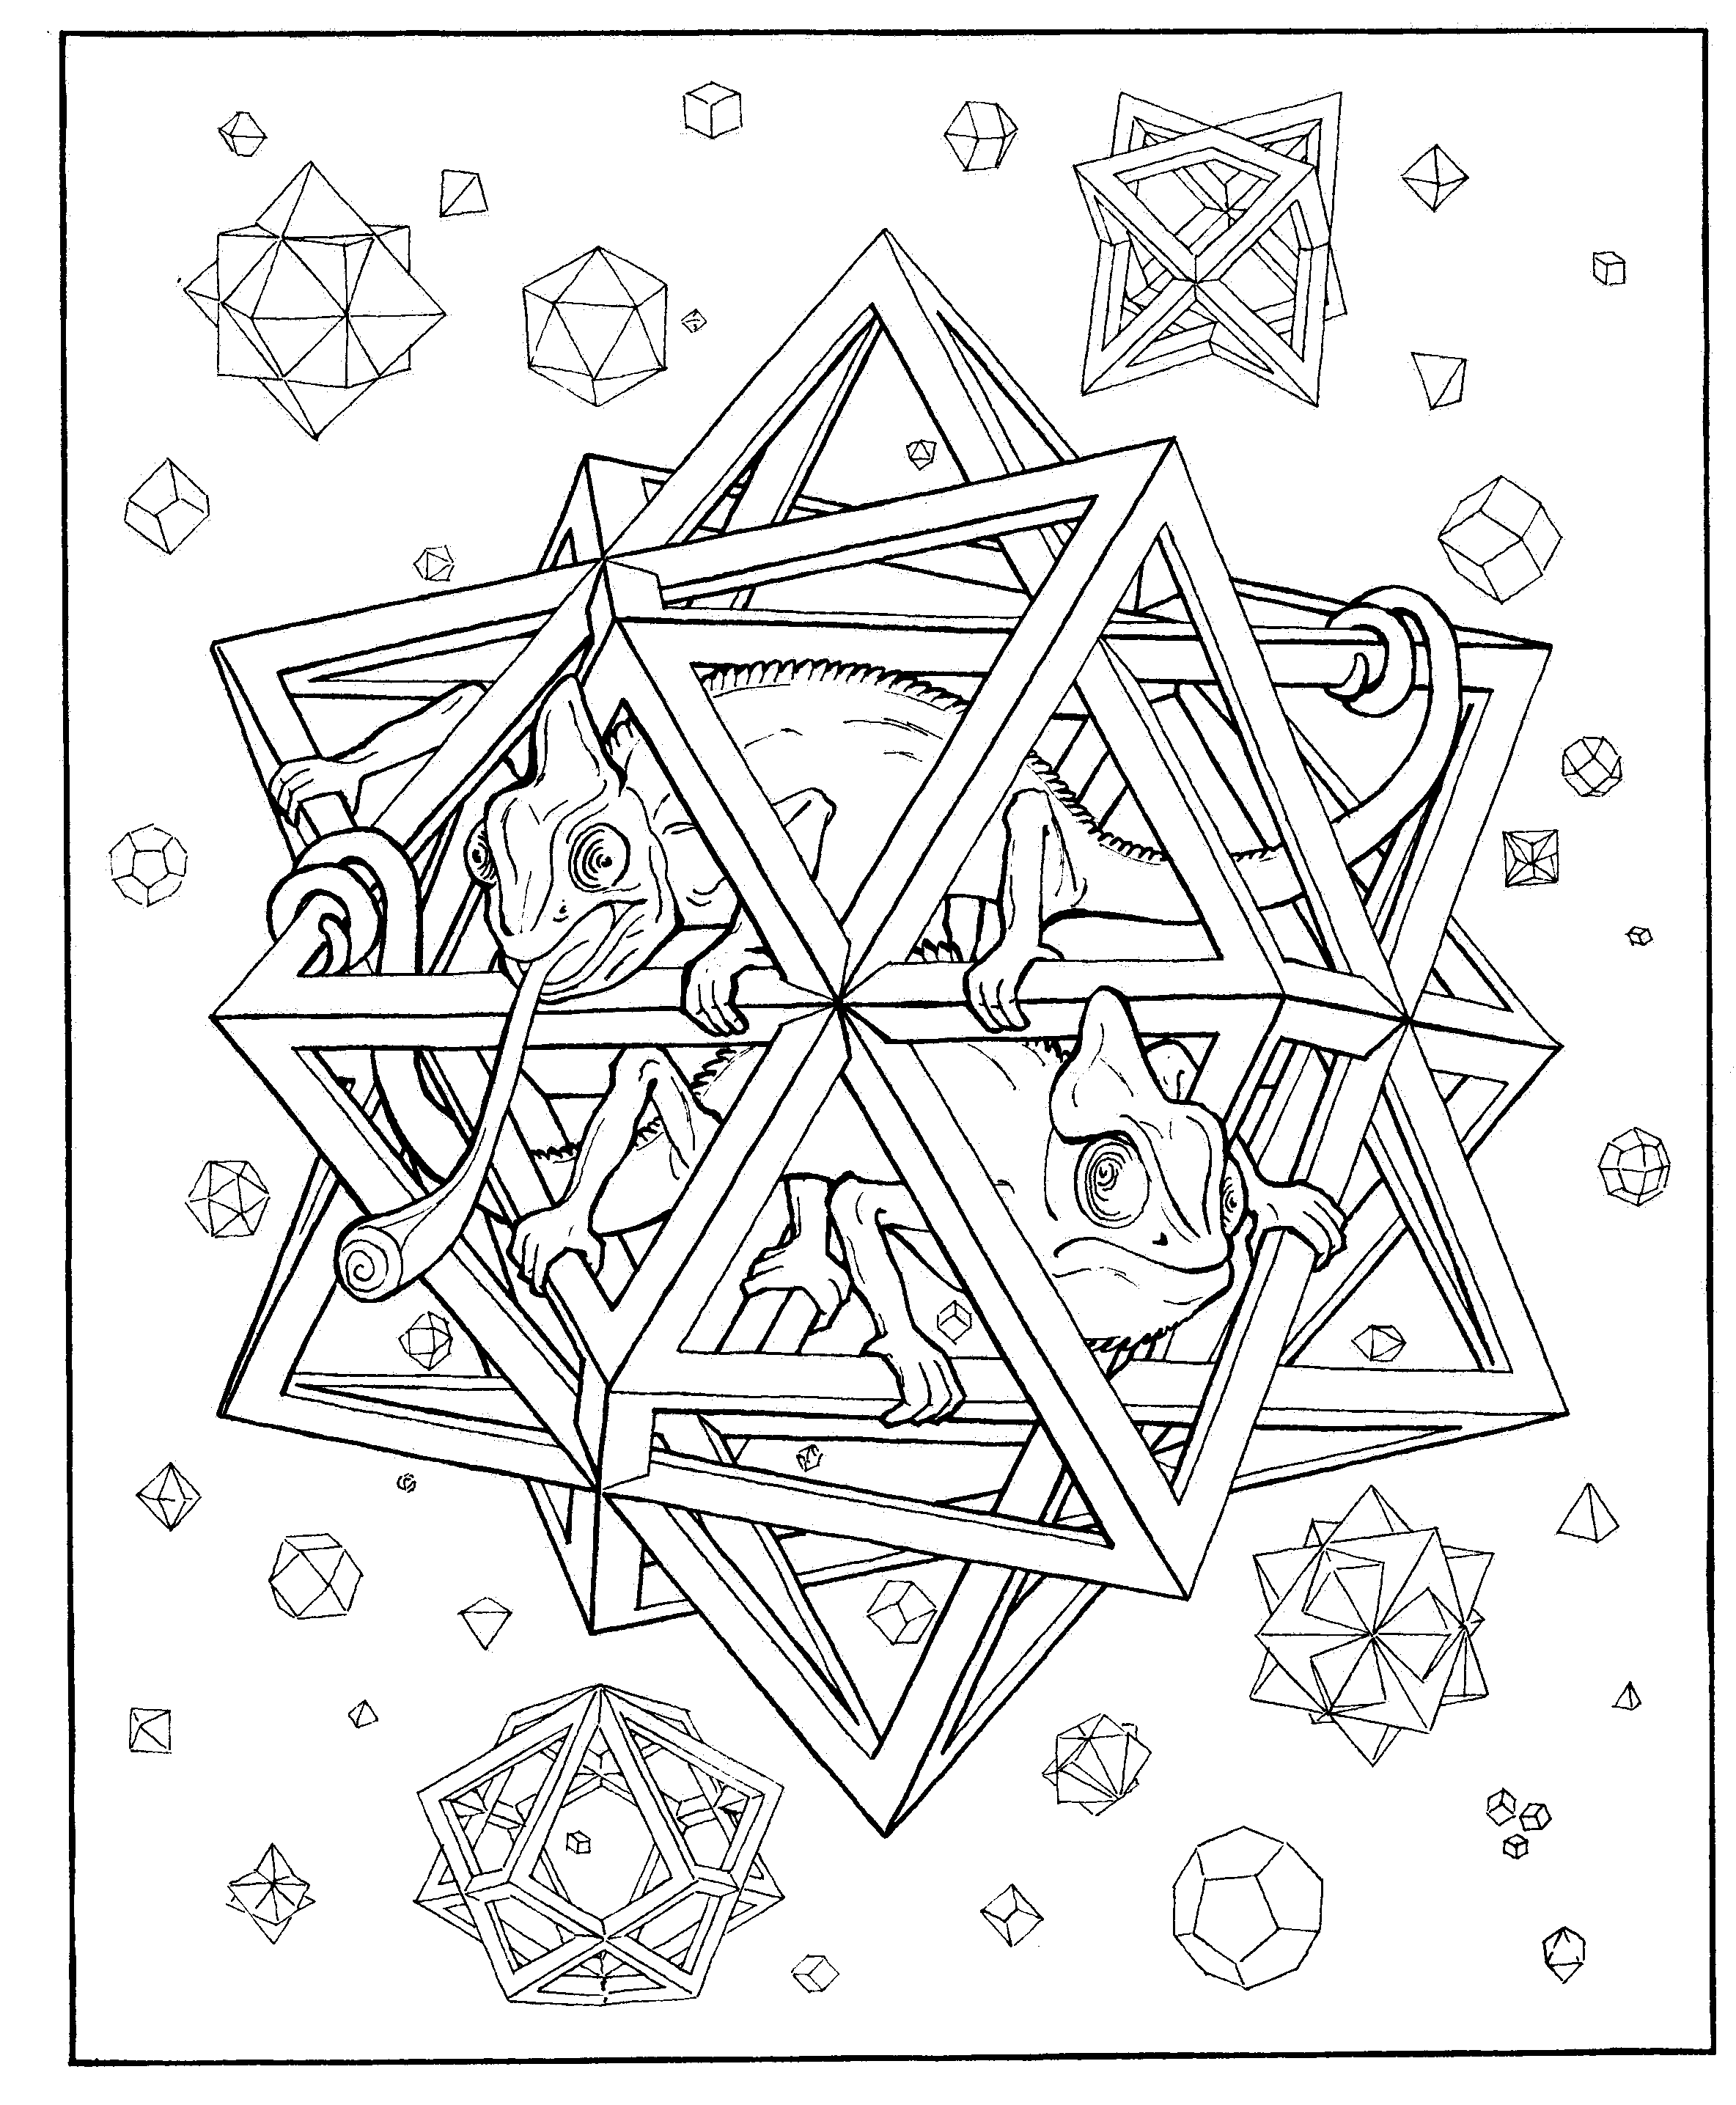 99 Ideas Abstract Shape Coloring Pages Emergingartspdx Shapes Home